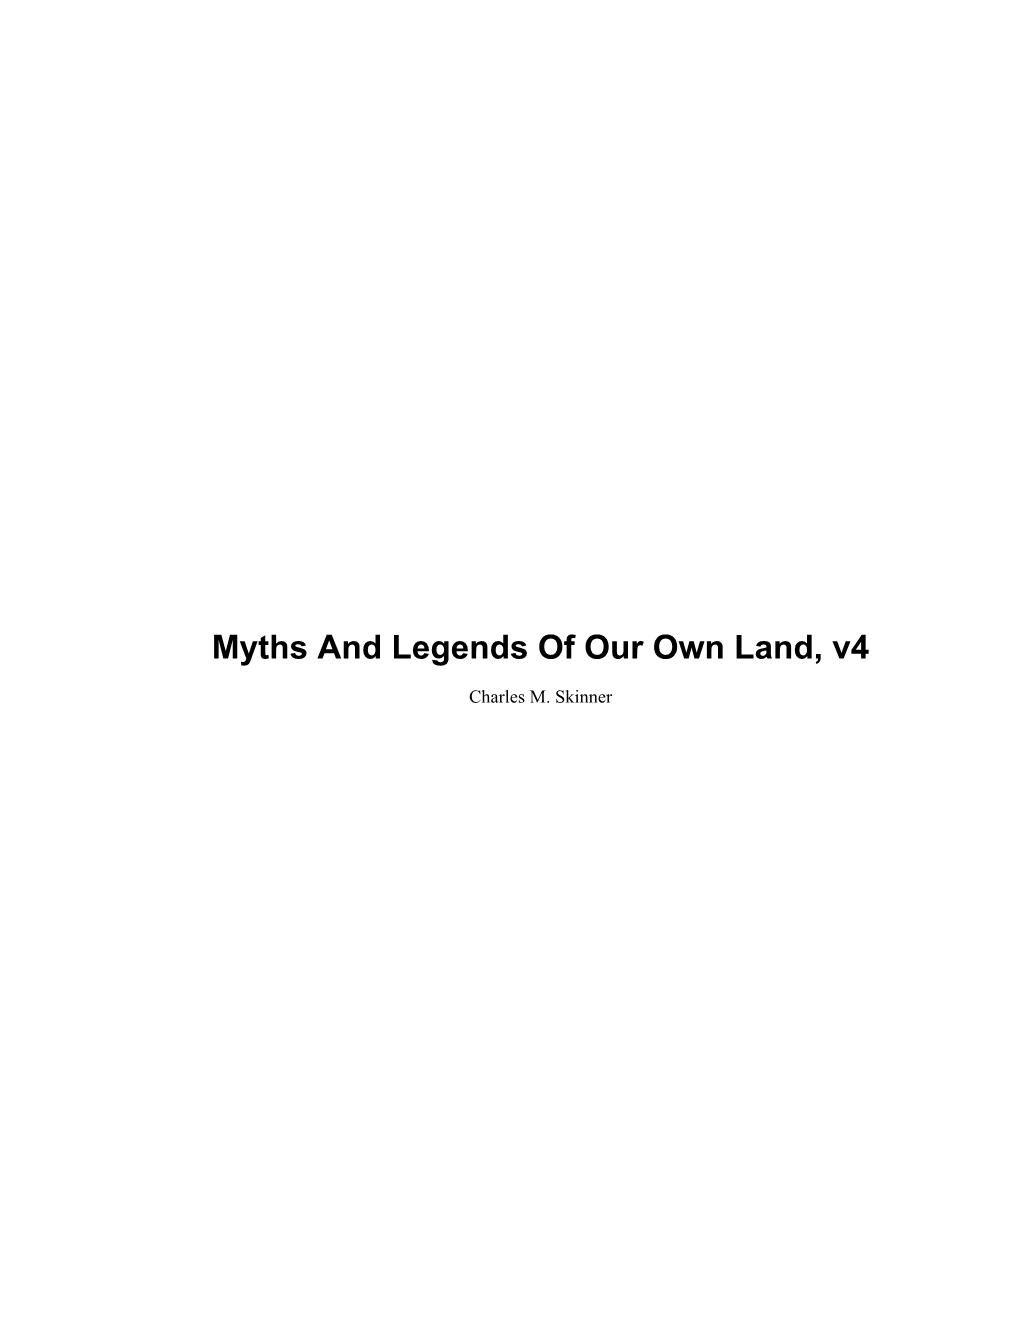 Myths and Legends of Our Own Land, V4